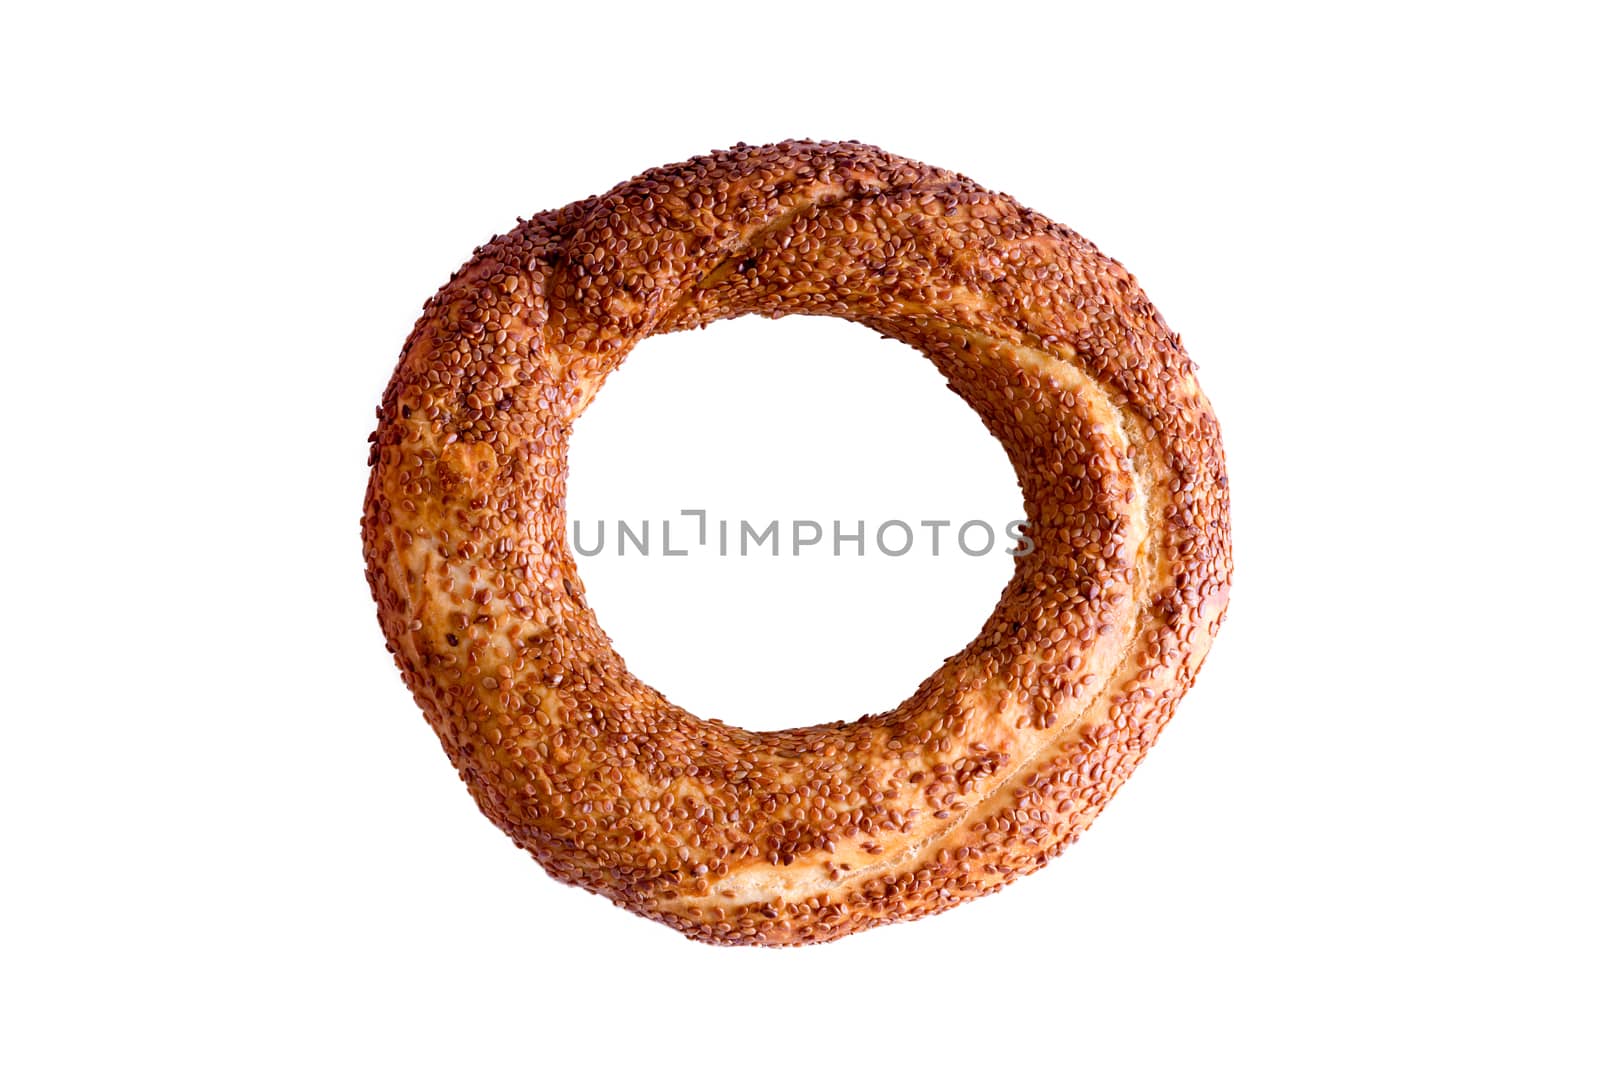 Freshly baked crispy golden Turkish simit, a traditional circular bread with sesame seeds served with Turkish tea, isolated on white